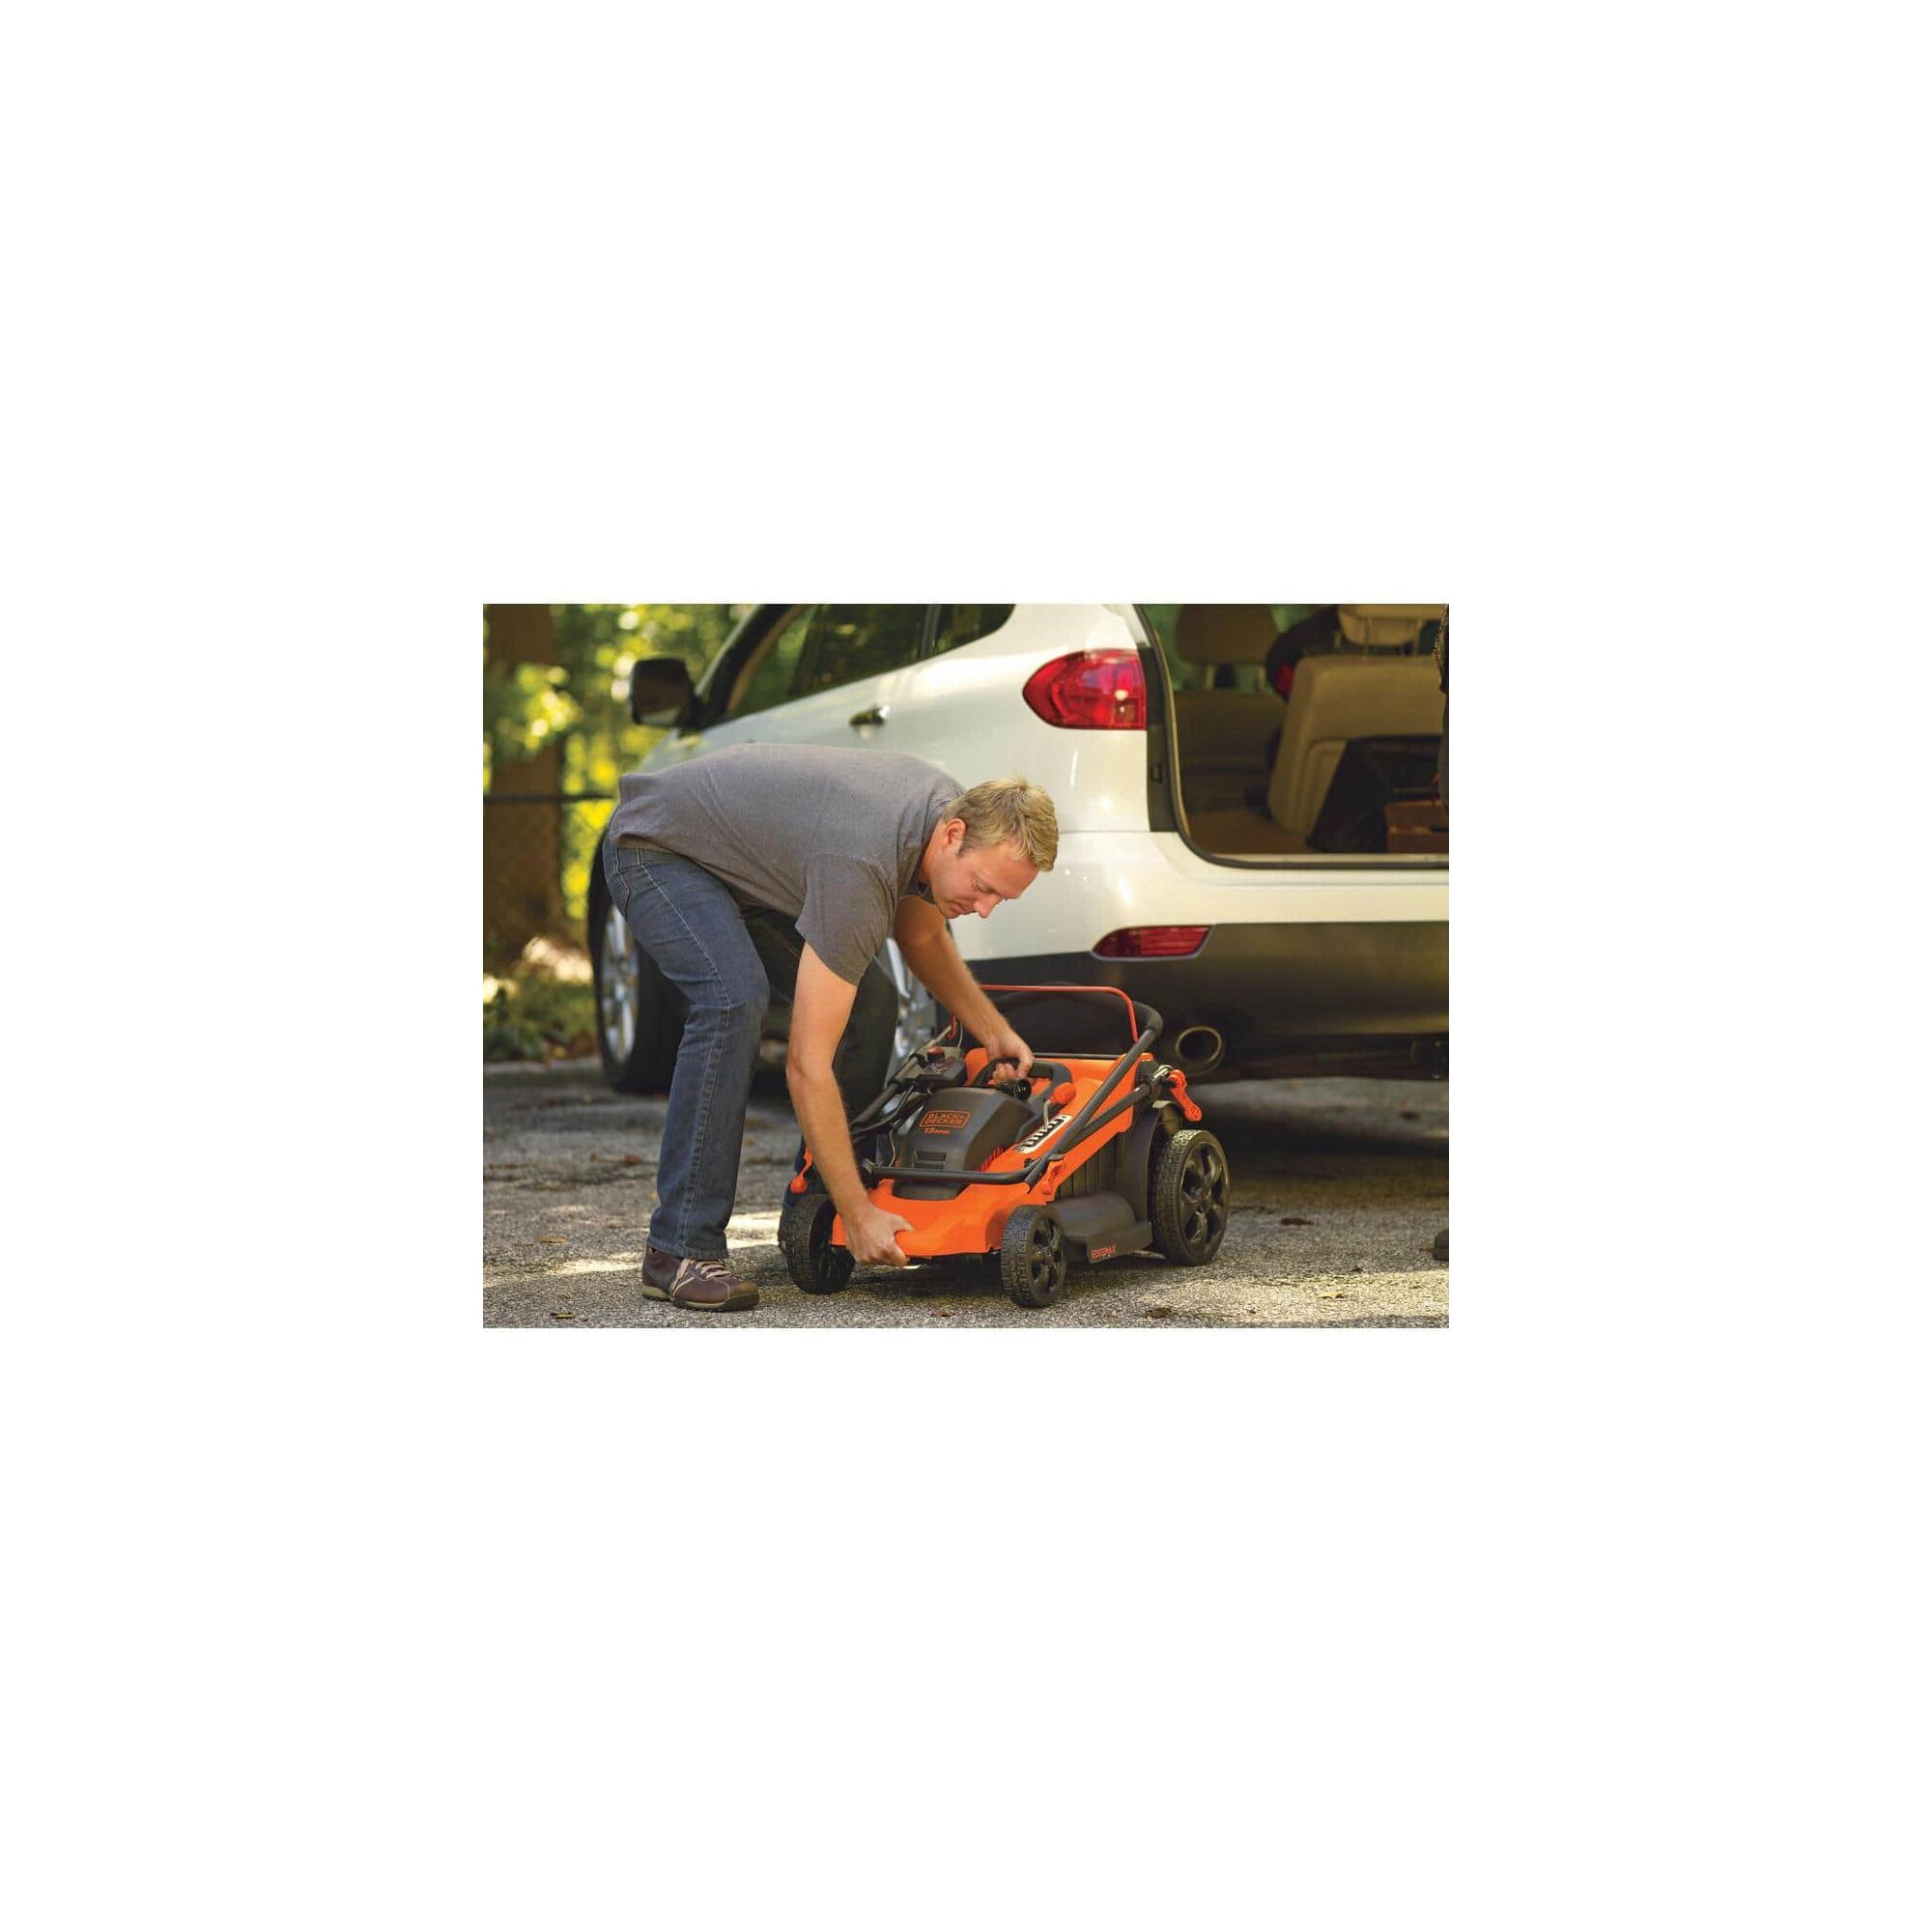 Person lifting portable lawn mower into the truck of a car